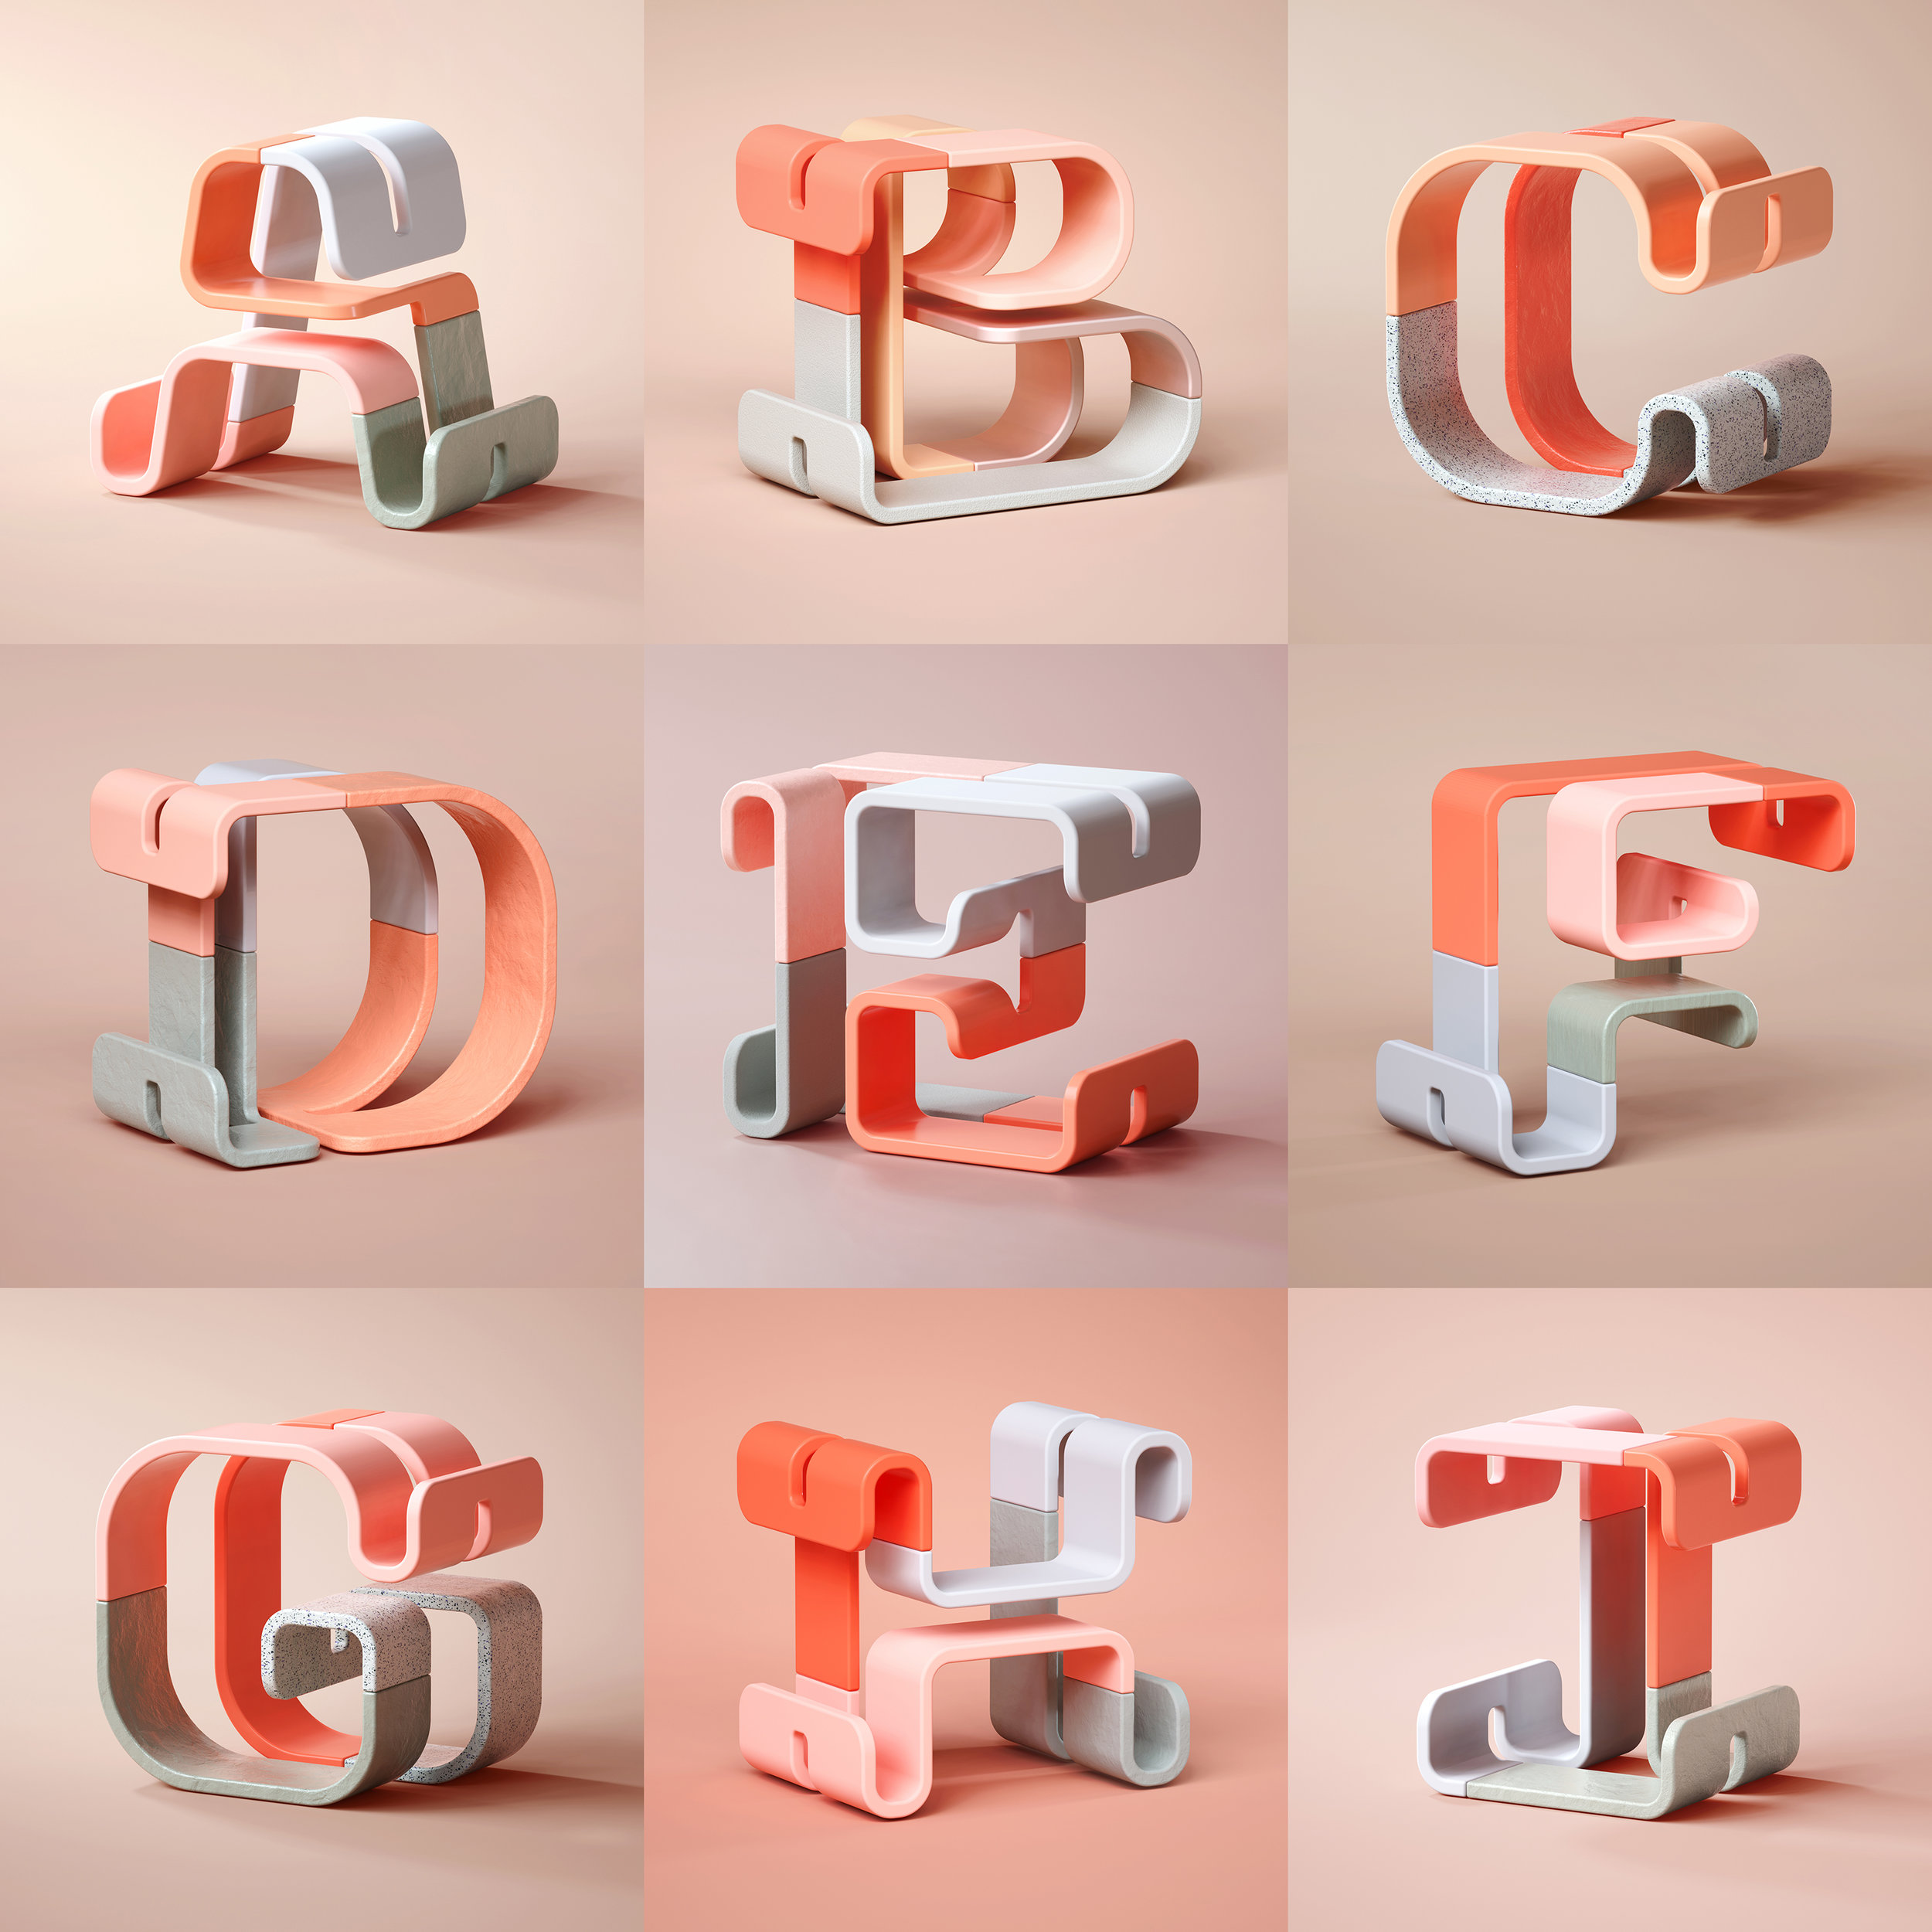 36 Days of Type 2019 - 3D Typeform letter A to I visuals by Singapore bas.....